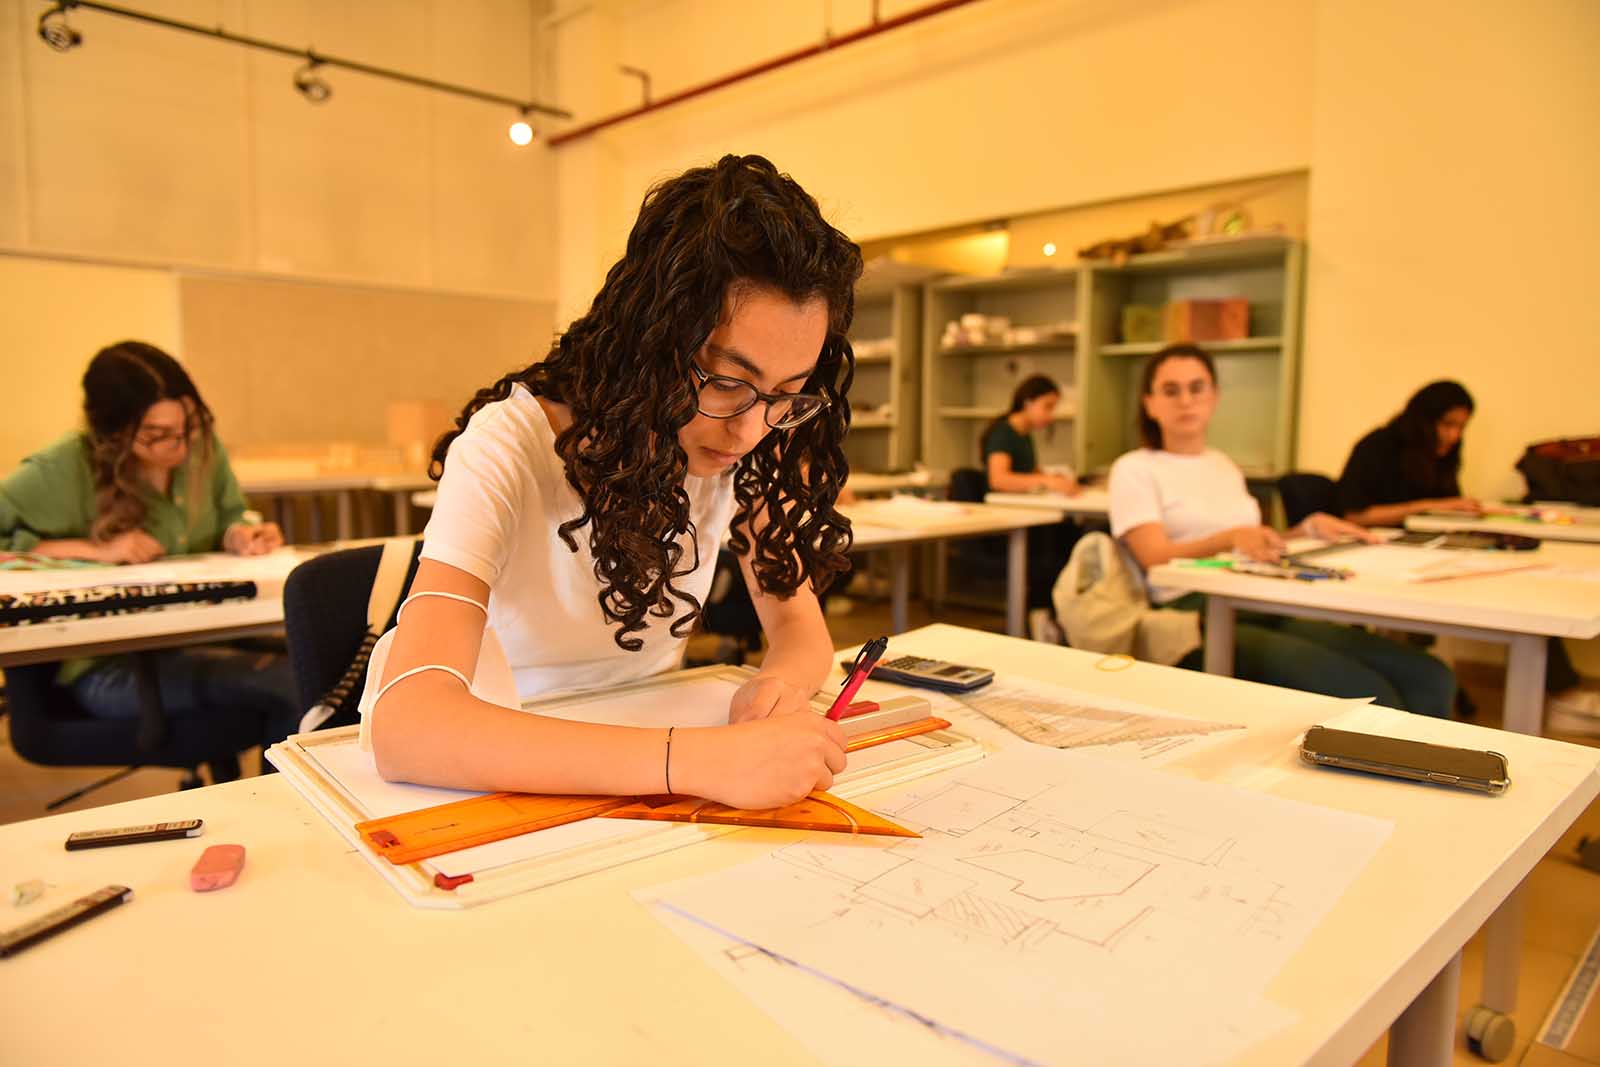 female student drawing on the drawing board with architectural equipment